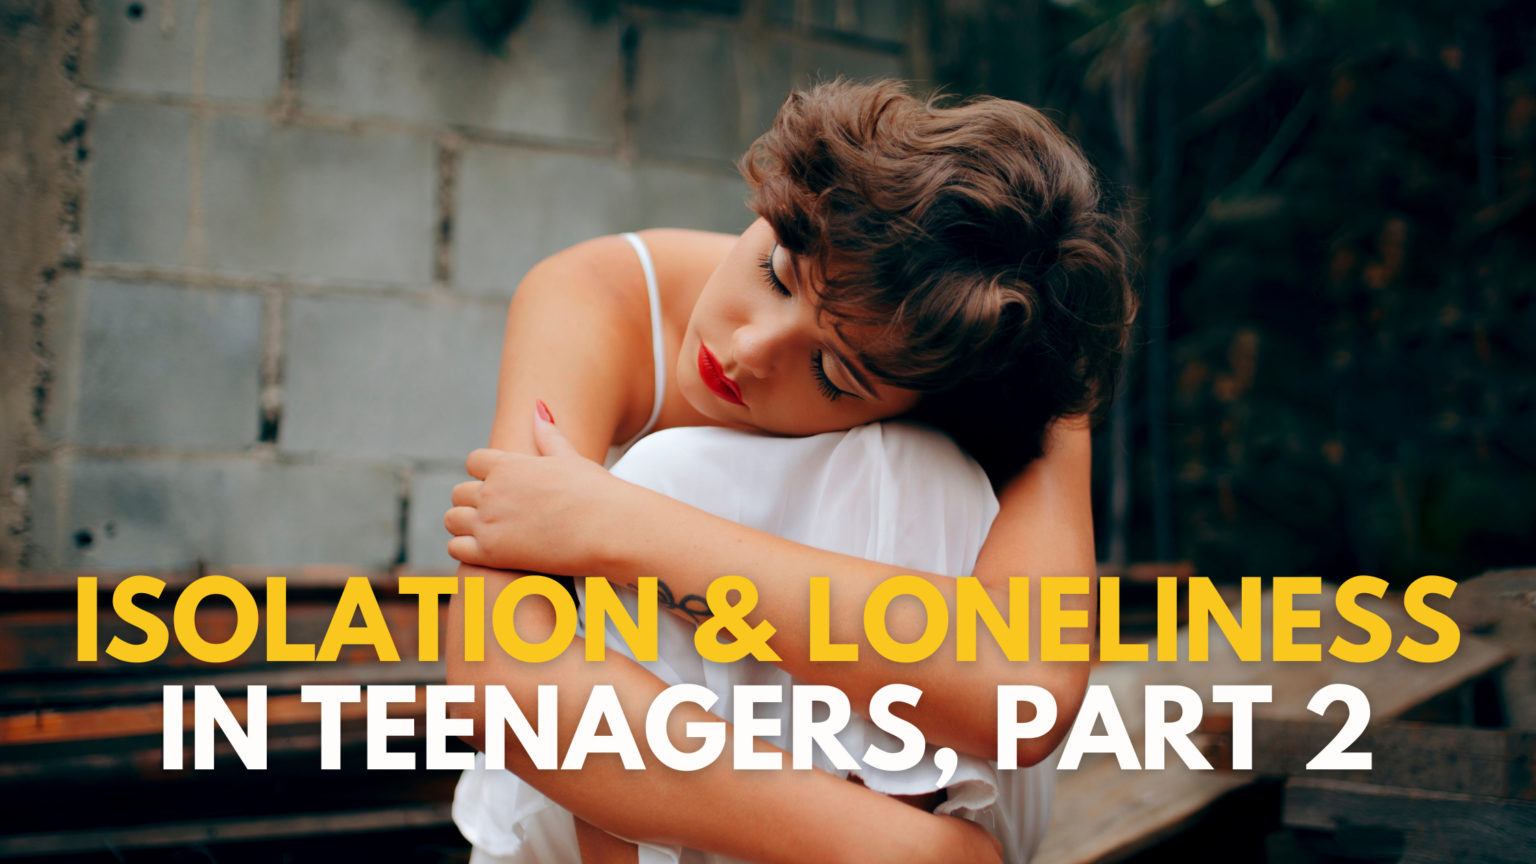 Isolation & Loneliness In Teenagers Part 2